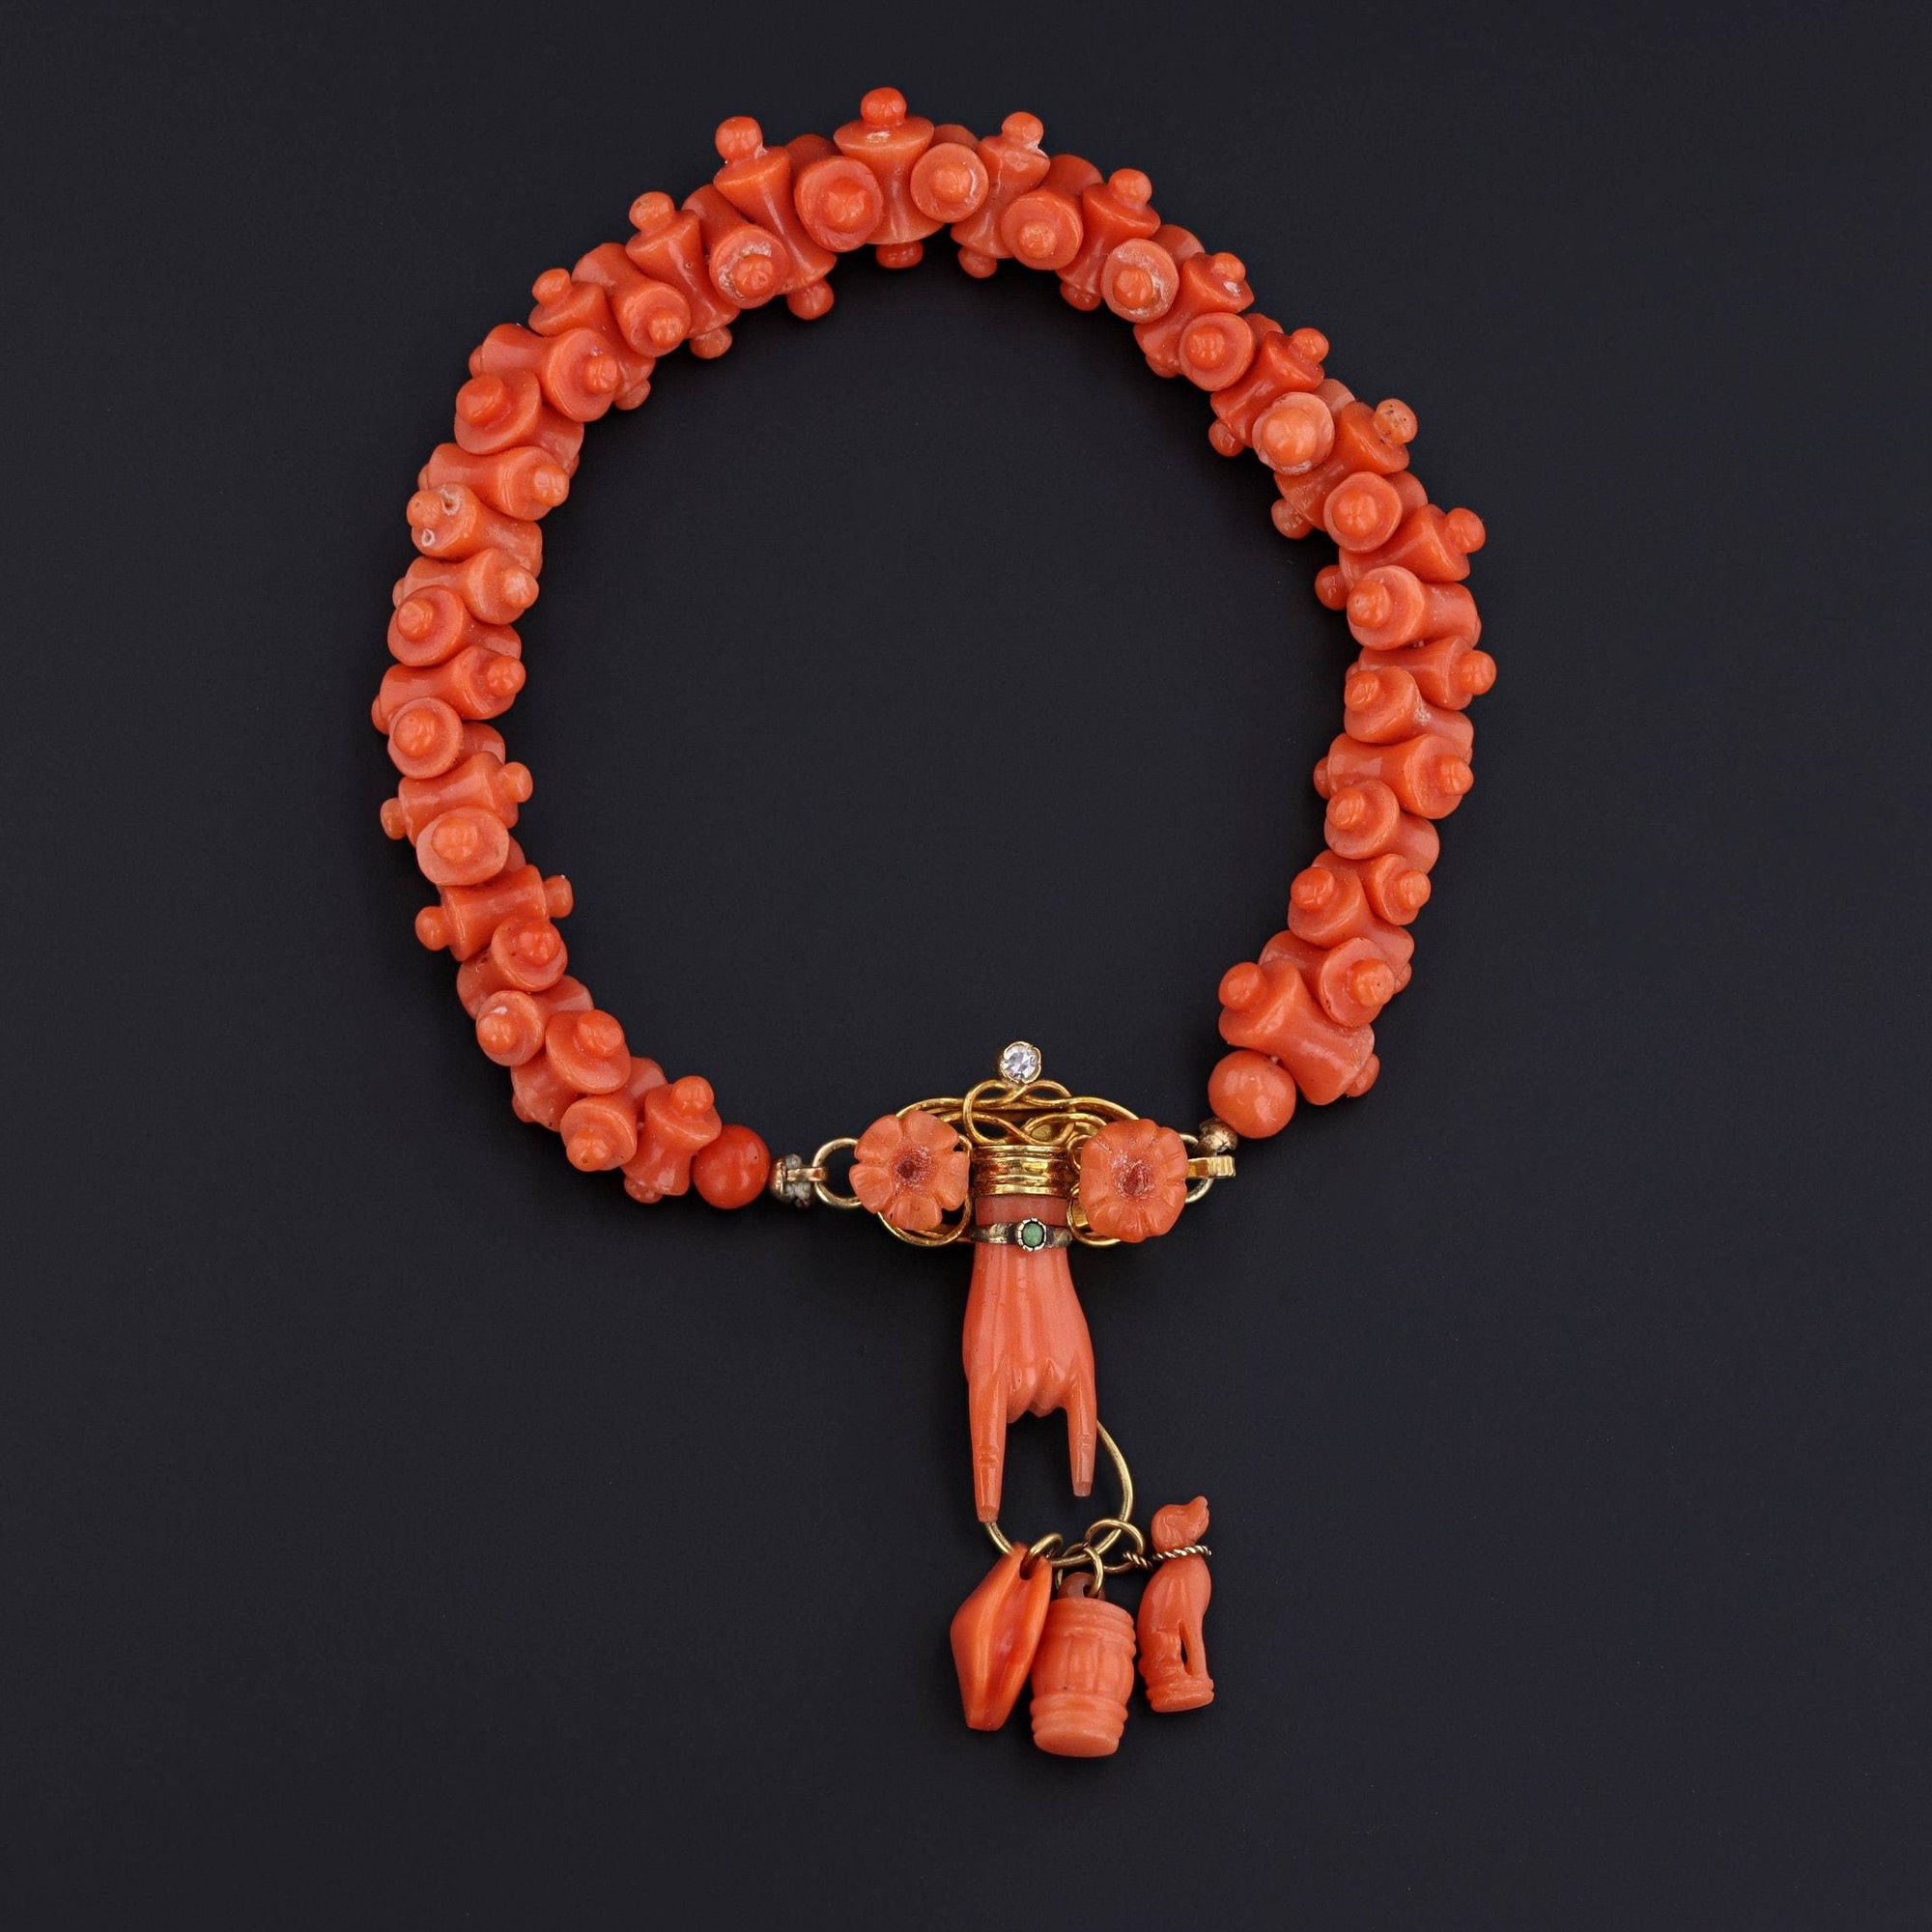 Antique Coral Bracelet with Figa and Charms | Victorian Carved Coral Bracelet 